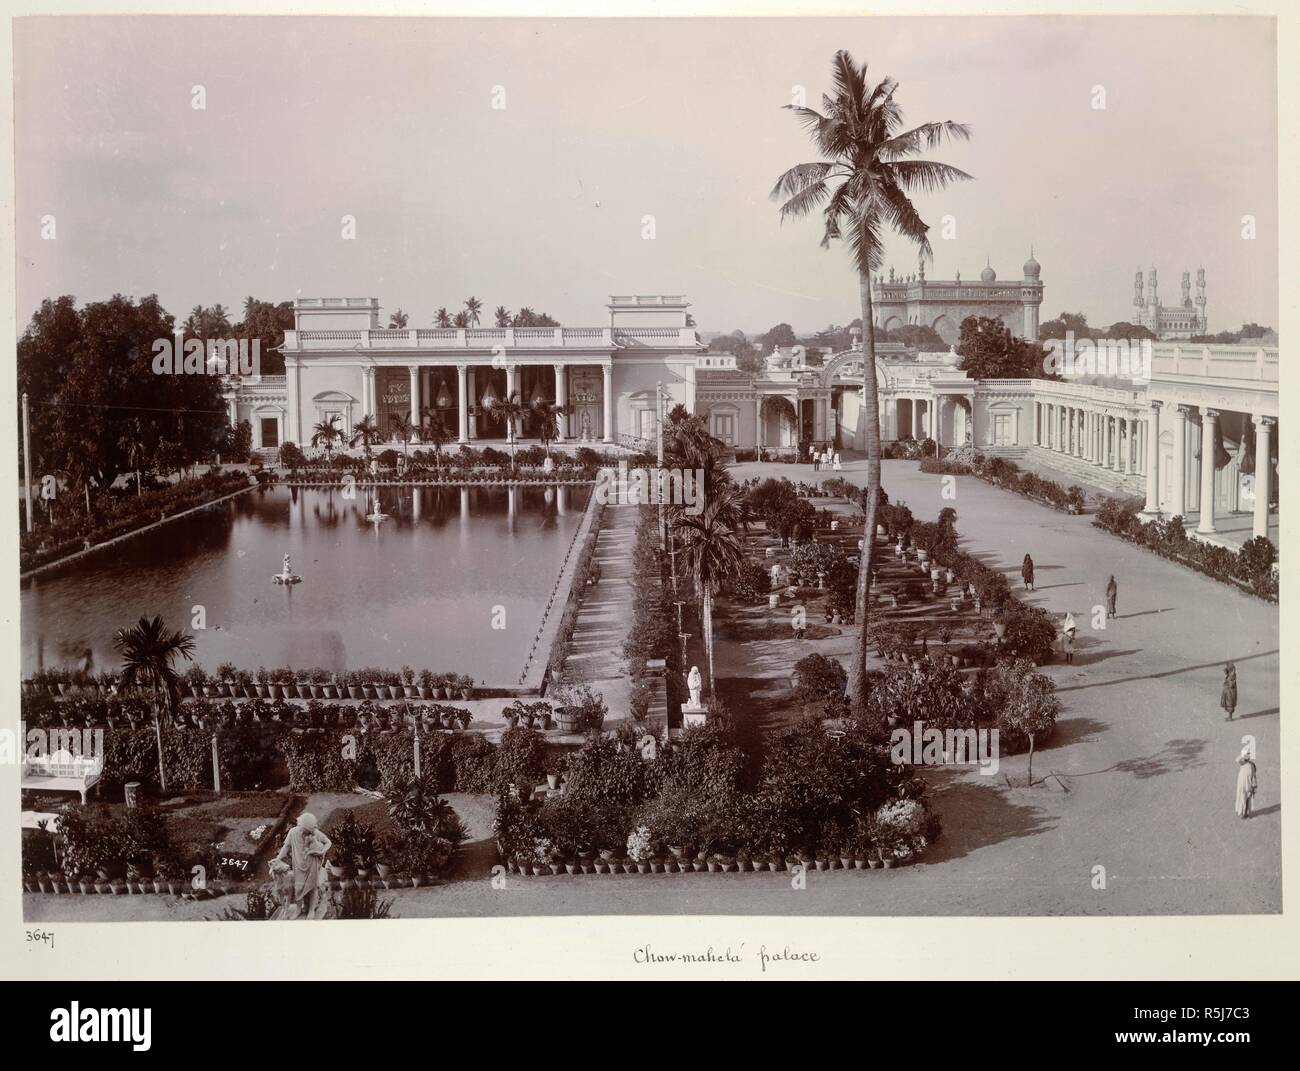 Chow-mahela palace [Hyderabad]. A view looking across the garden and tank towards one of the buildings of the Chaumahalla Palace. The Char Minar visile can be seen in the right background. Curzon Collection: 'Souvenir of the Visit of H.E. Lord Curzon of Kedleston Viceroy of India to H.H. the Nizam's Dominions April 1902'. c. 1902. Photograph. Source: Photo 430/33(41). Language: English. Author: Dayal, Deen. Stock Photo